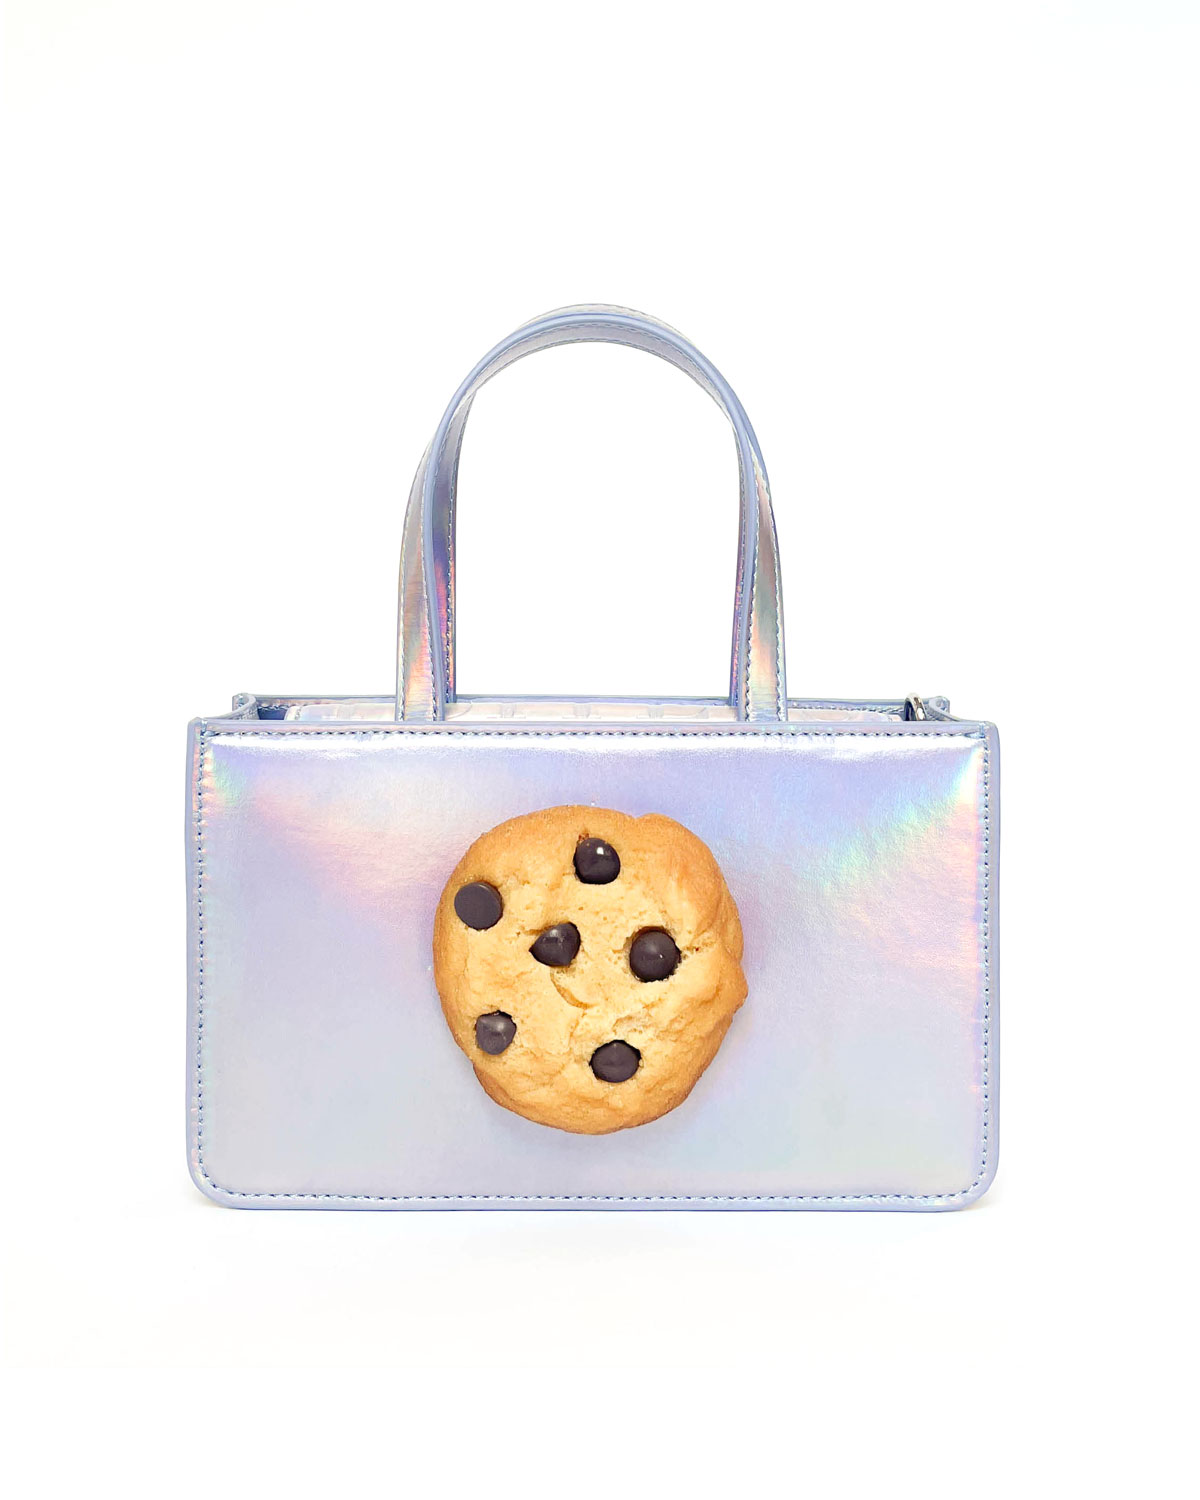 Bizzare Novelty Bags That Will Captivate Your Fashion Senses